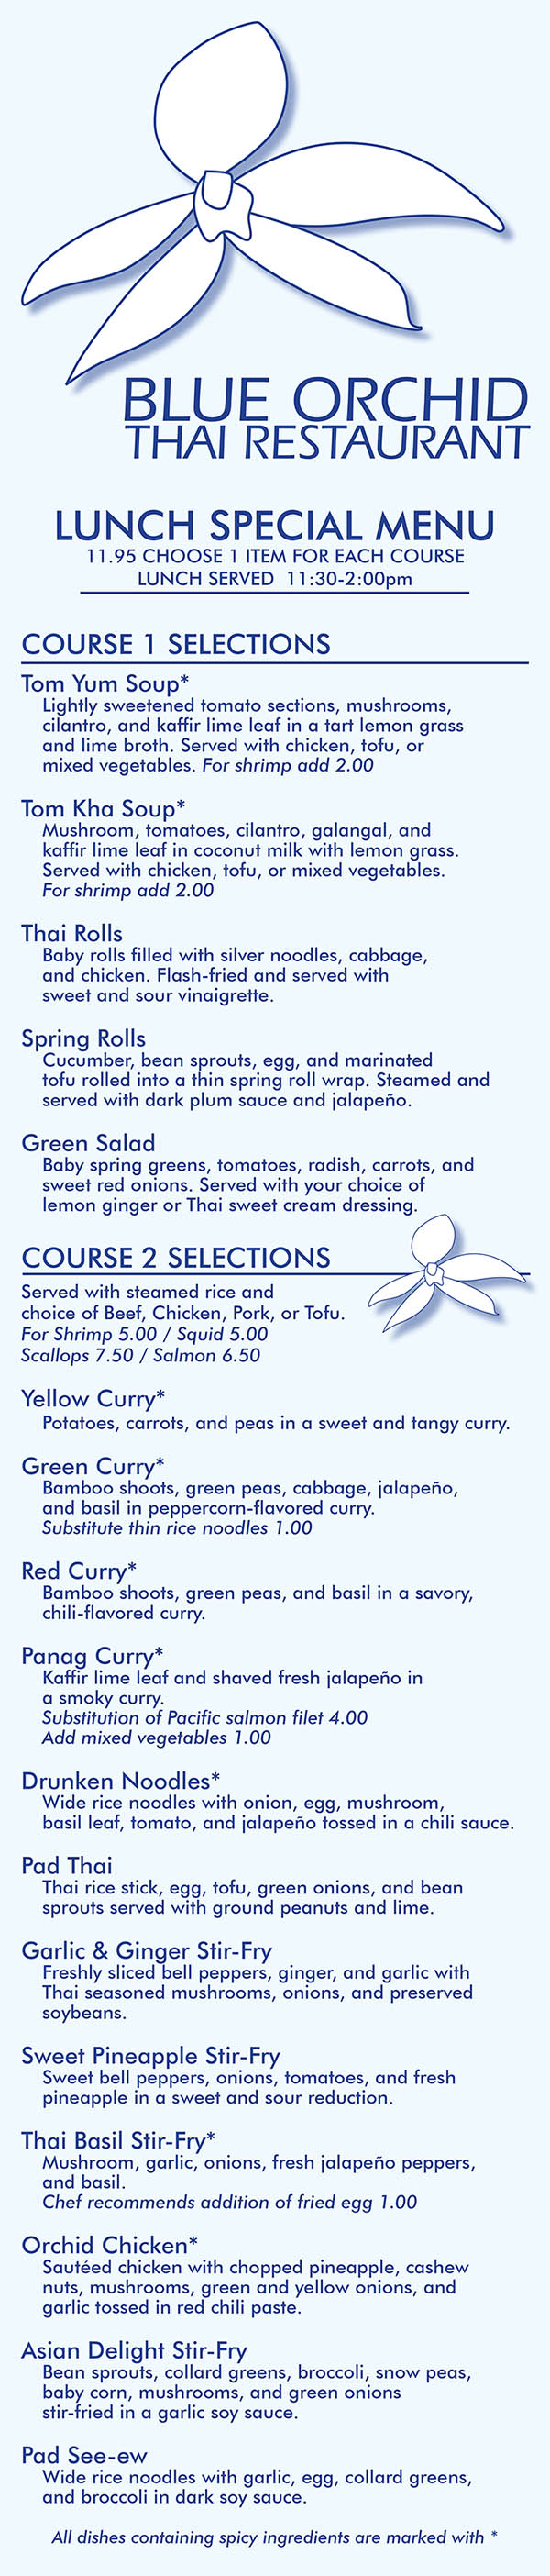 Blue Orchid Thai Restaurant Lunch Menu 
BLUE ORCHID
THAI RESTAURANT

LUNCH SPECIAL MENU
11.95 CHOOSE 1 ITEM FOR EACH COURSE
LUNCH SERVED  11:30-2:00pm


COURSE 1 SELECTIONS
Tom Yum Soup*
	Lightly sweetened tomato sections, mushrooms, 
	cilantro, and kaffir lime leaf in a tart lemon grass 
	and lime broth. Served with chicken, tofu, or 
	mixed vegetables. For shrimp add 2.00

Tom Kha Soup*
	Mushroom, tomatoes, cilantro, galangal, and 
	kaffir lime leaf in coconut milk with lemon grass. 
	Served with chicken, tofu, or mixed vegetables. 
	For shrimp add 2.00

Thai Rolls
	Baby rolls filled with silver noodles, cabbage, 
	and chicken. Flash-fried and served with 
	sweet and sour vinaigrette.

Spring Rolls
	Cucumber, bean sprouts, egg, and marinated 
	tofu rolled into a thin spring roll wrap. Steamed and
	served with dark plum sauce and jalapeño.

Green Salad
	Baby spring greens, tomatoes, radish, carrots, and 
	sweet red onions. Served with your choice of 
	lemon ginger or Thai sweet cream dressing.

COURSE 2 SELECTIONS
Served with steamed rice and 
choice of Beef, Chicken, Pork, or Tofu.
For Shrimp 5.00 / Squid 5.00 
Scallops 7.50 / Salmon 6.50

Yellow Curry*
	Potatoes, carrots, and peas in a sweet and tangy curry.

Green Curry*
	Bamboo shoots, green peas, cabbage, jalapeño, 
	and basil in peppercorn-flavored curry.
	Substitute thin rice noodles 1.00

Red Curry*
	Bamboo shoots, green peas, and basil in a savory,
	chili-flavored curry.

Panag Curry*
	Kaffir lime leaf and shaved fresh jalapeño in 
	a smoky curry.
	Substitution of Pacific salmon filet 4.00
	Add mixed vegetables 1.00

Drunken Noodles*
	Wide rice noodles with onion, egg, mushroom, 
	basil leaf, tomato, and jalapeño tossed in a chili sauce.

Pad Thai
	Thai rice stick, egg, tofu, green onions, and bean
	sprouts served with ground peanuts and lime.

Garlic & Ginger Stir-Fry
	Freshly sliced bell peppers, ginger, and garlic with 
	Thai seasoned mushrooms, onions, and preserved 
	soybeans.

Sweet Pineapple Stir-Fry
	Sweet bell peppers, onions, tomatoes, and fresh 
	pineapple in a sweet and sour reduction.

Thai Basil Stir-Fry*
	Mushroom, garlic, onions, fresh jalapeño peppers, 
	and basil.
	Chef recommends addition of fried egg 1.00

Orchid Chicken*
	Sautéed chicken with chopped pineapple, cashew 
	nuts, mushrooms, green and yellow onions, and 
	garlic tossed in red chili paste. 

Asian Delight Stir-Fry
	Bean sprouts, collard greens, broccoli, snow peas, 
	baby corn, mushrooms, and green onions 
	stir-fried in a garlic soy sauce.

Pad See-ew
	Wide rice noodles with garlic, egg, collard greens, 
	and broccoli in dark soy sauce.

All dishes containing spicy ingredients are marked with *